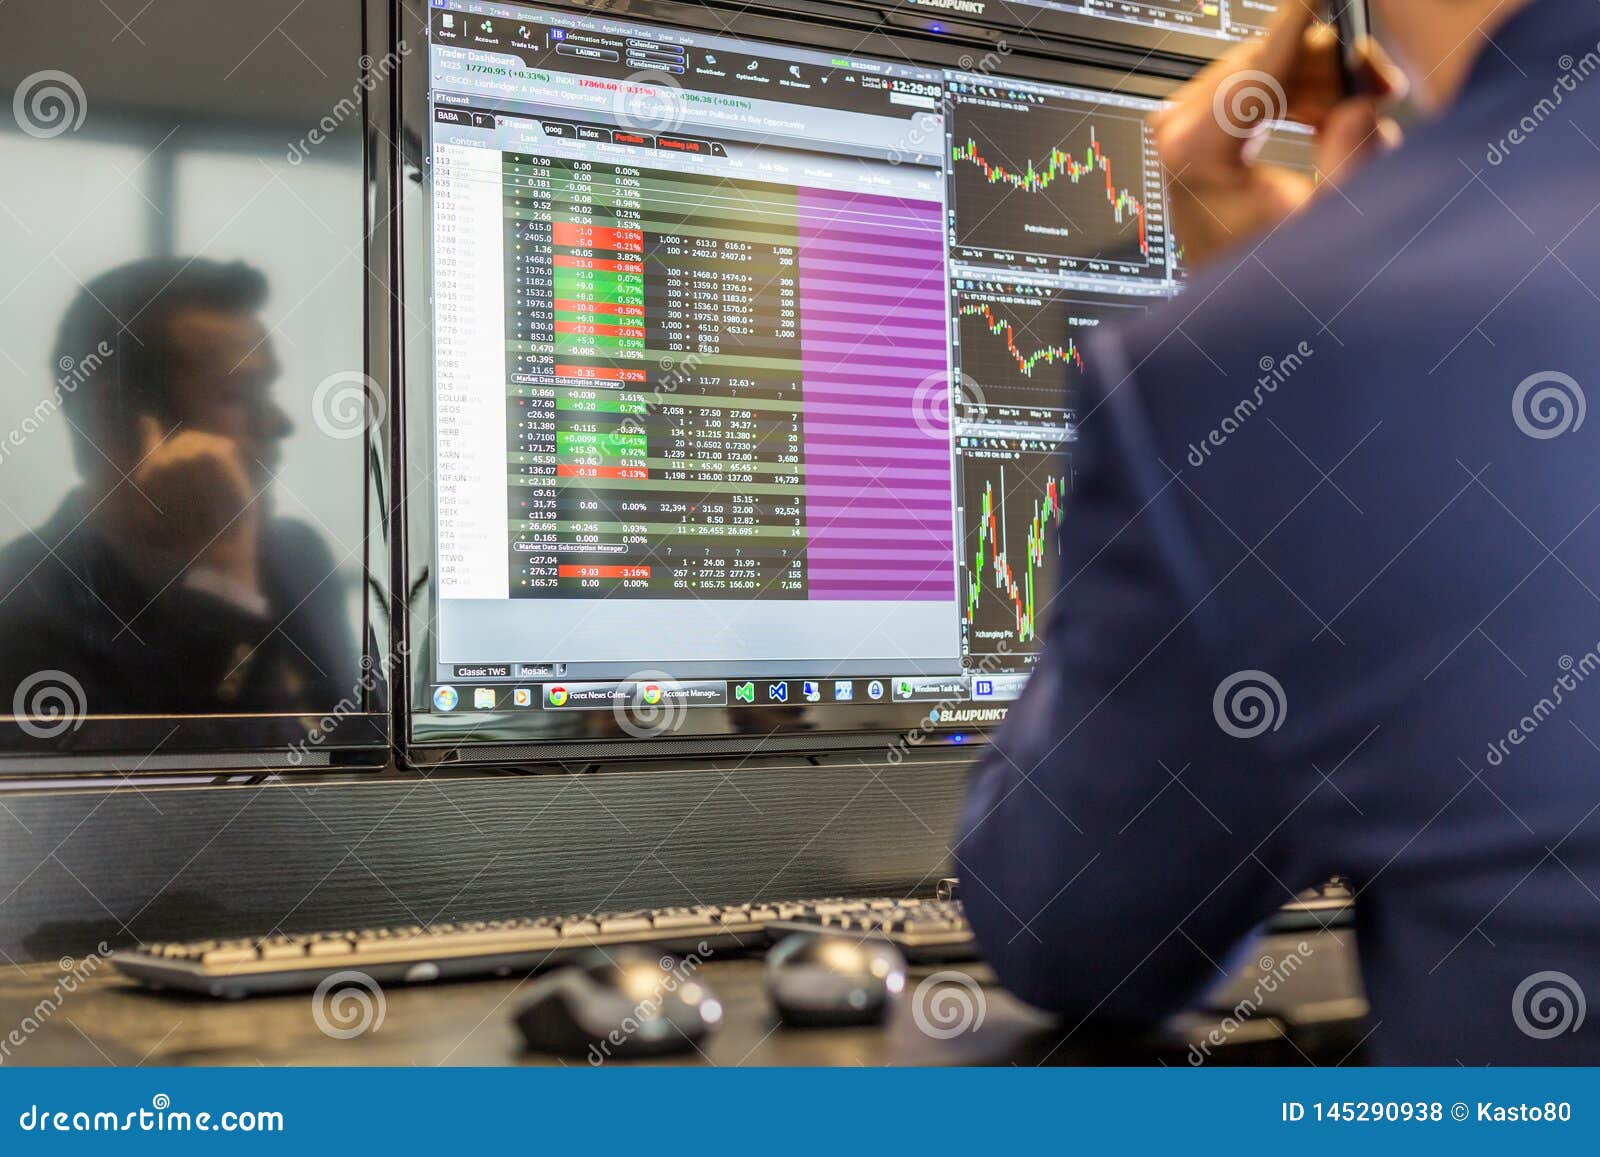 Stock Broker Trading Online, Talking On Mobile Phone. Editorial Stock Photo Image of equity